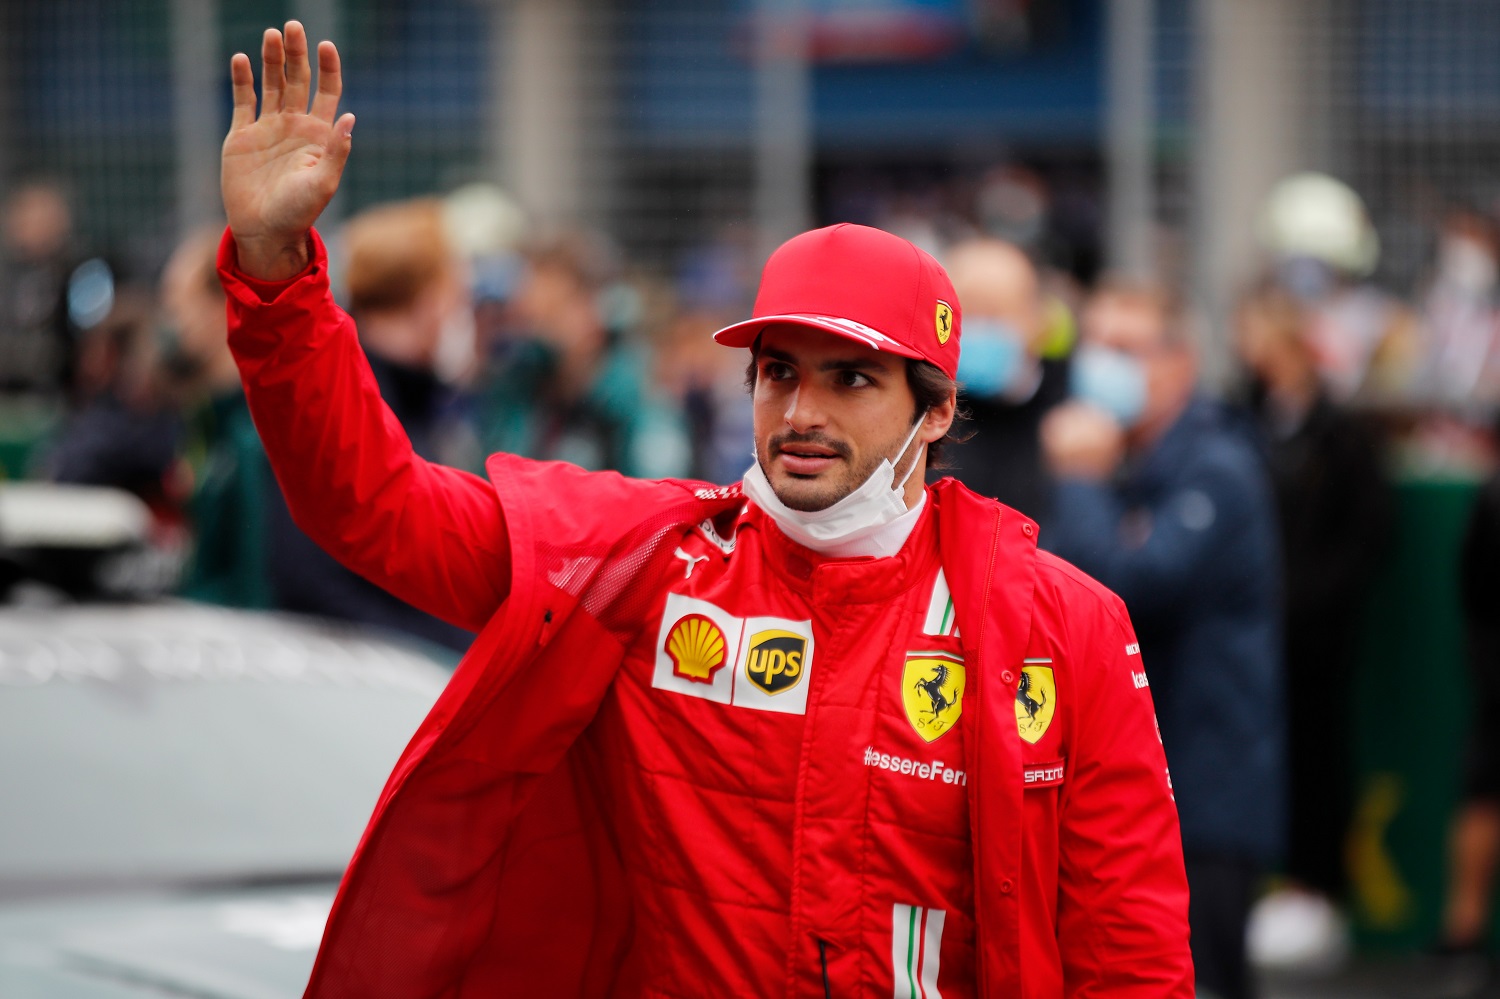 Carlos Sainz Jr. of Spain and Ferrari waves to the crowd before the Formula 1 Grand Prix of Turkey.